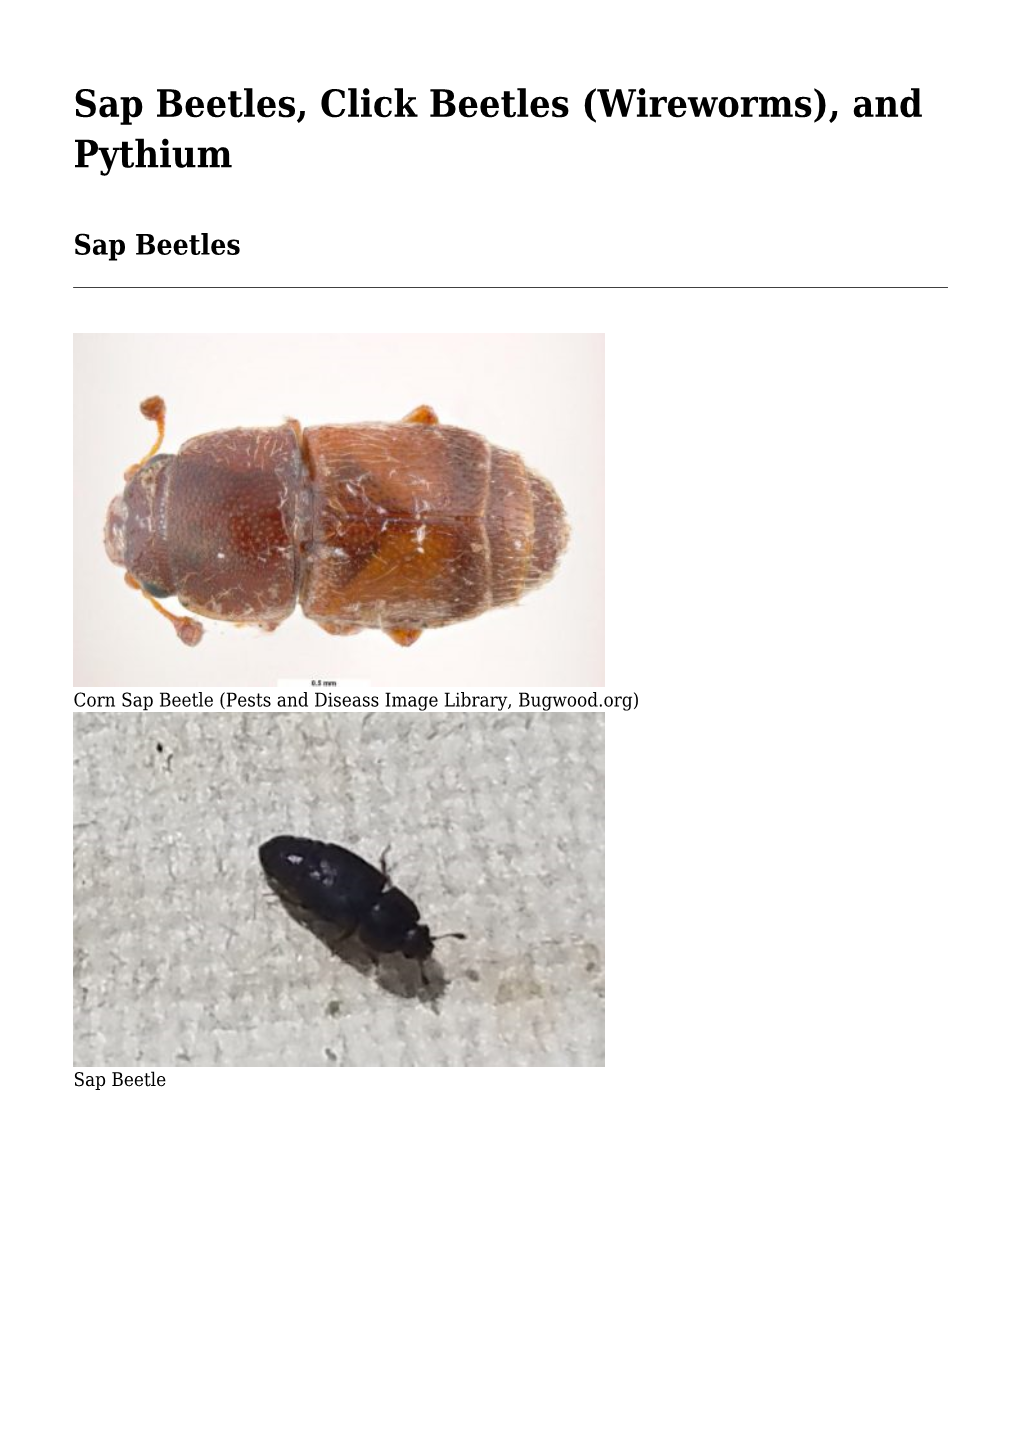 Sap Beetles, Click Beetles (Wireworms), and Pythium